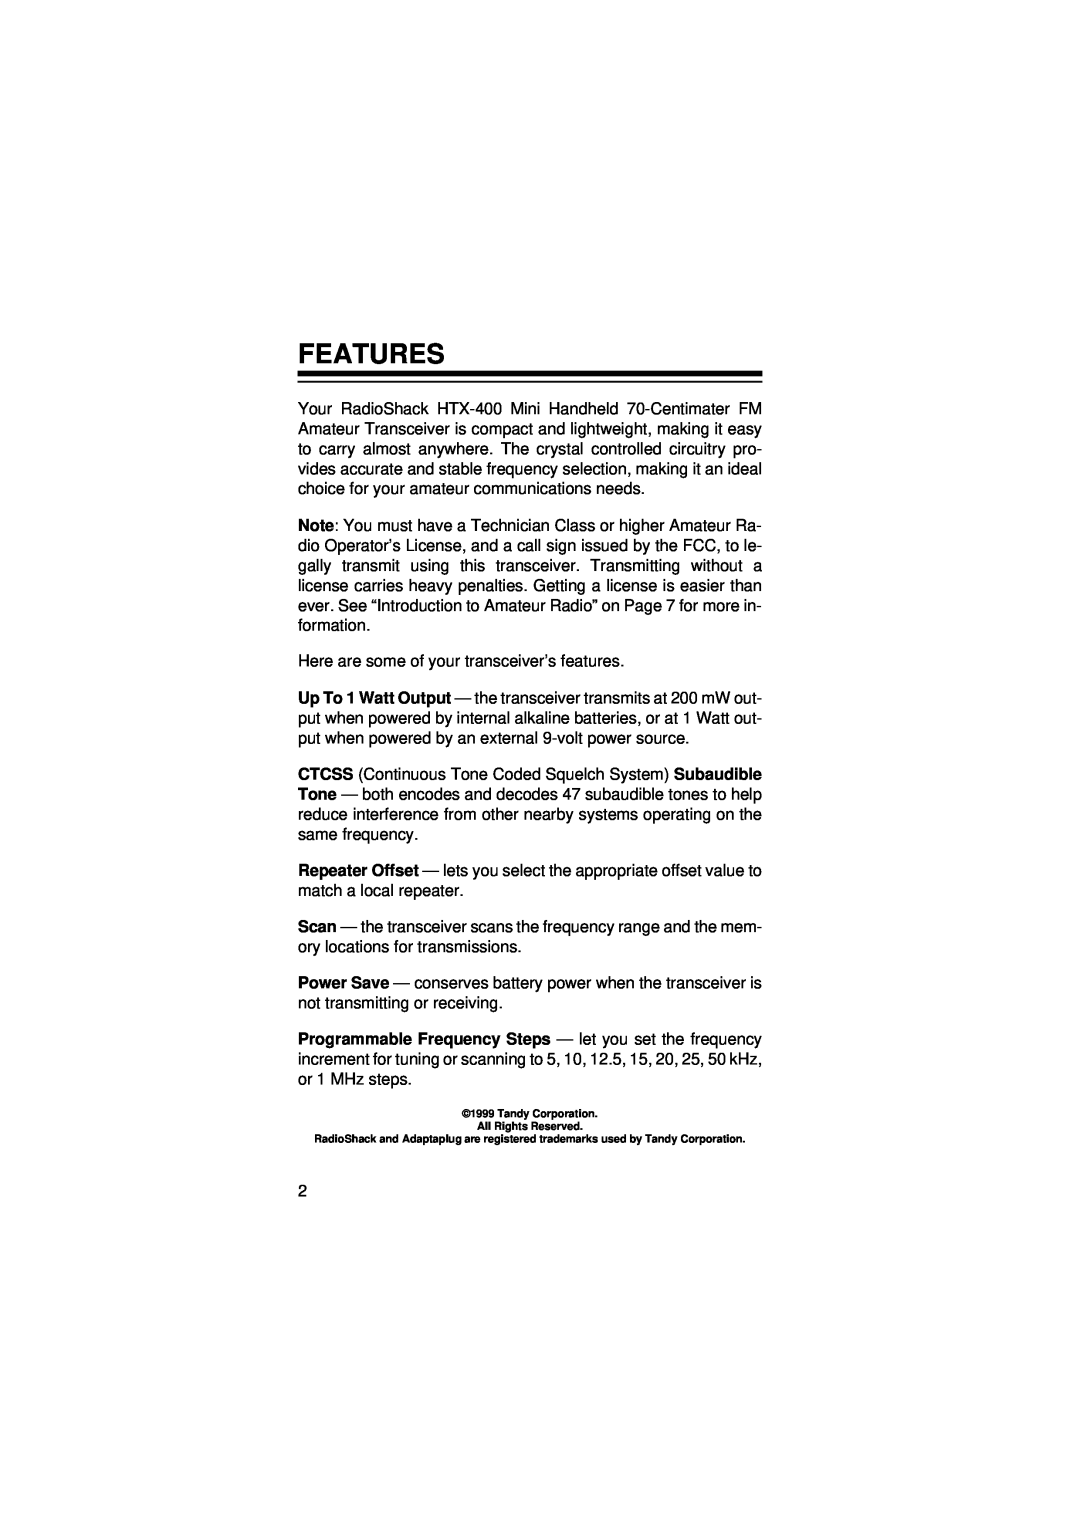 Radio Shack HTX-400 owner manual Features 